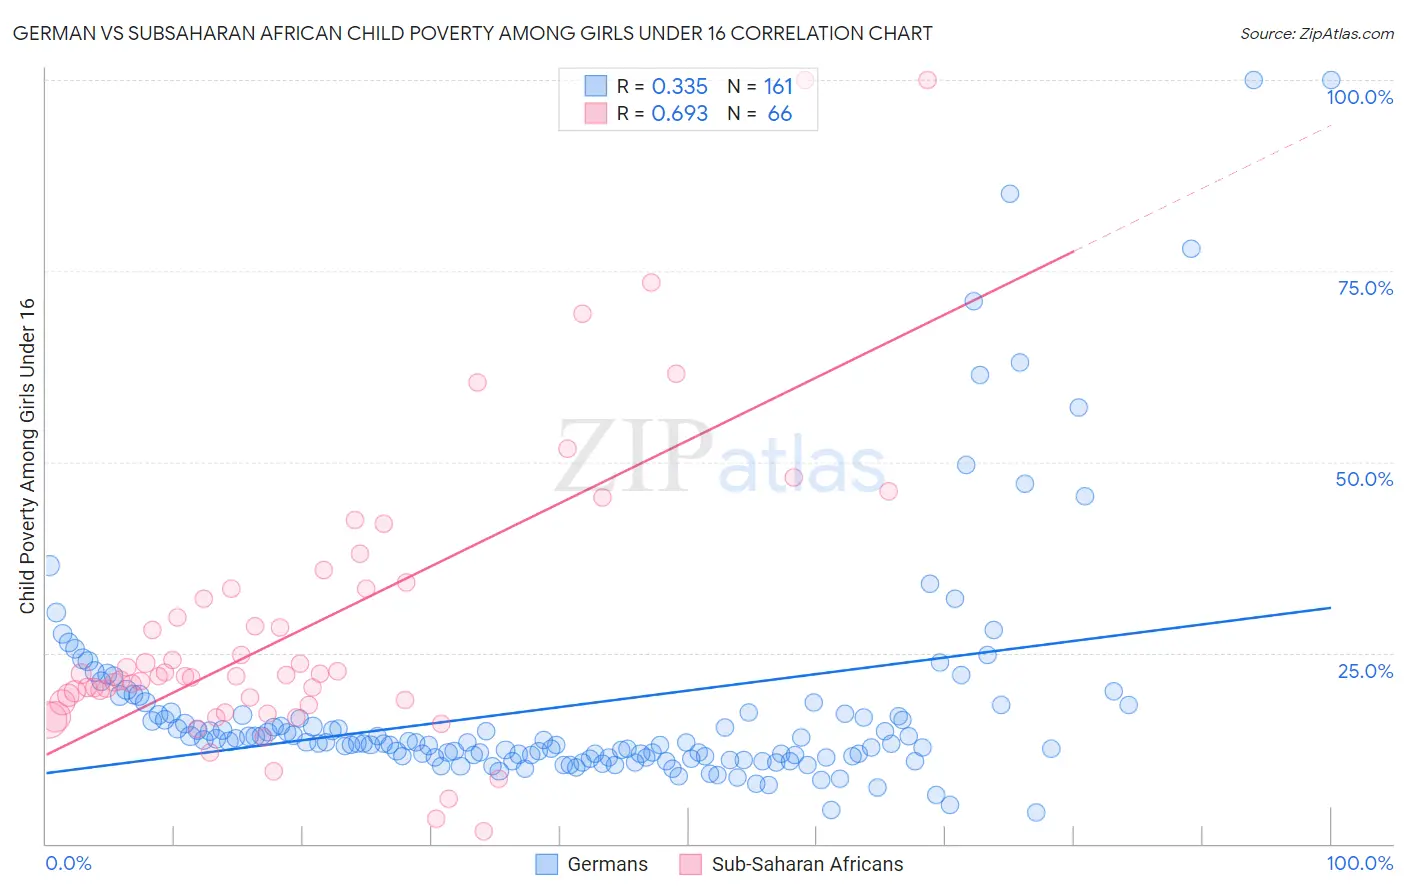 German vs Subsaharan African Child Poverty Among Girls Under 16